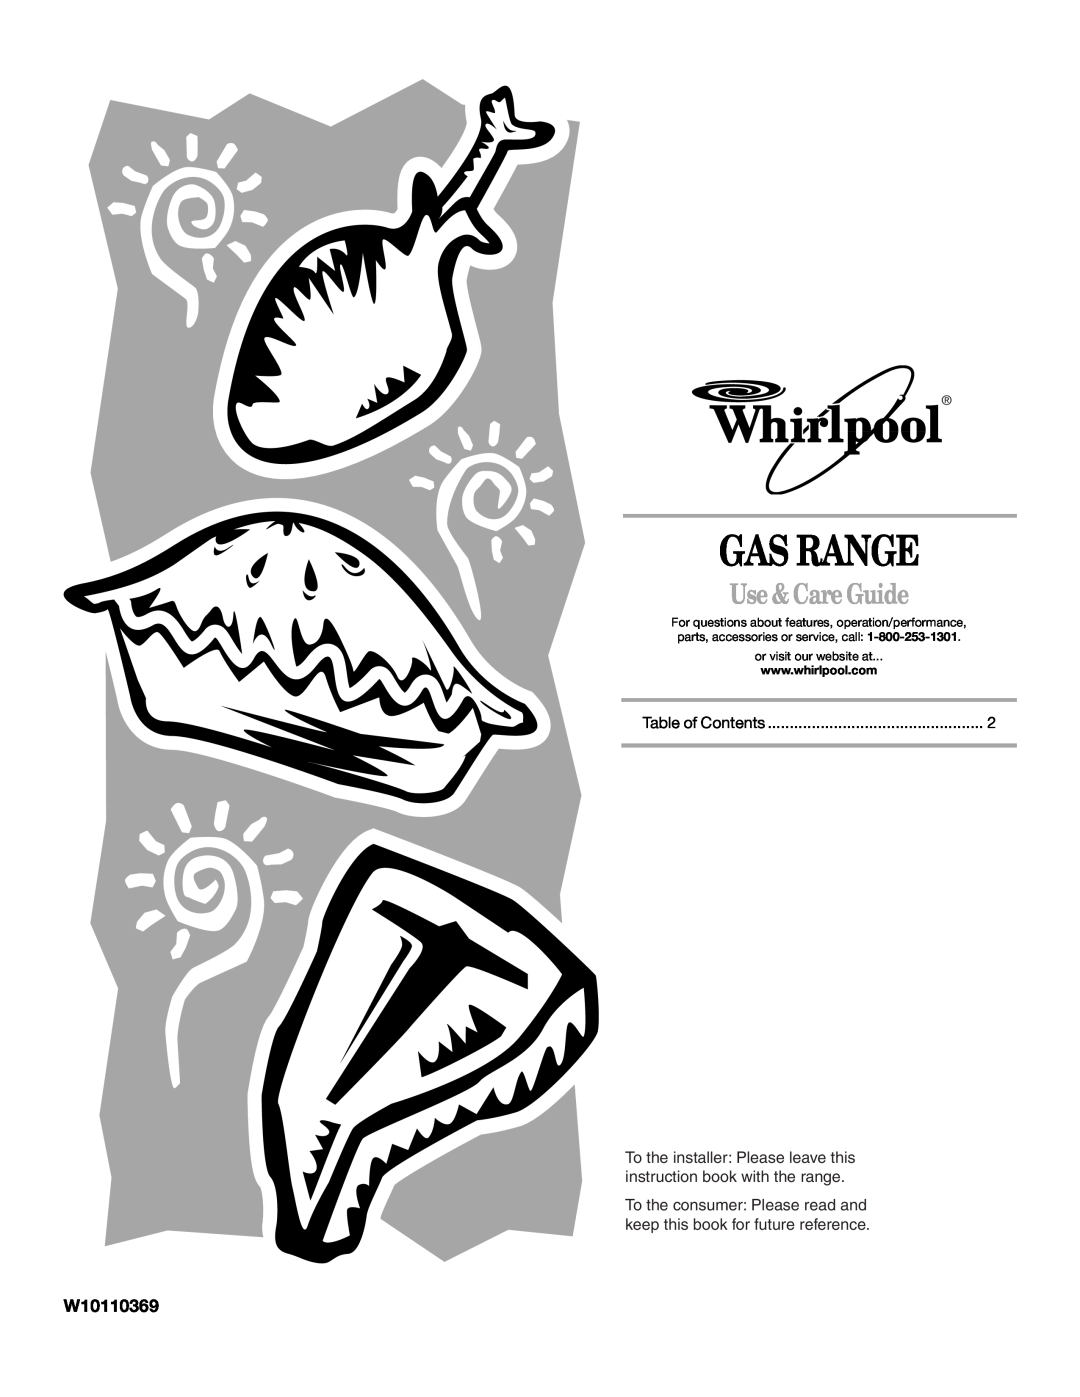 Whirlpool W10110369 manual Gas Range, Use & Care Guide, To the installer Please leave this instruction book with the range 